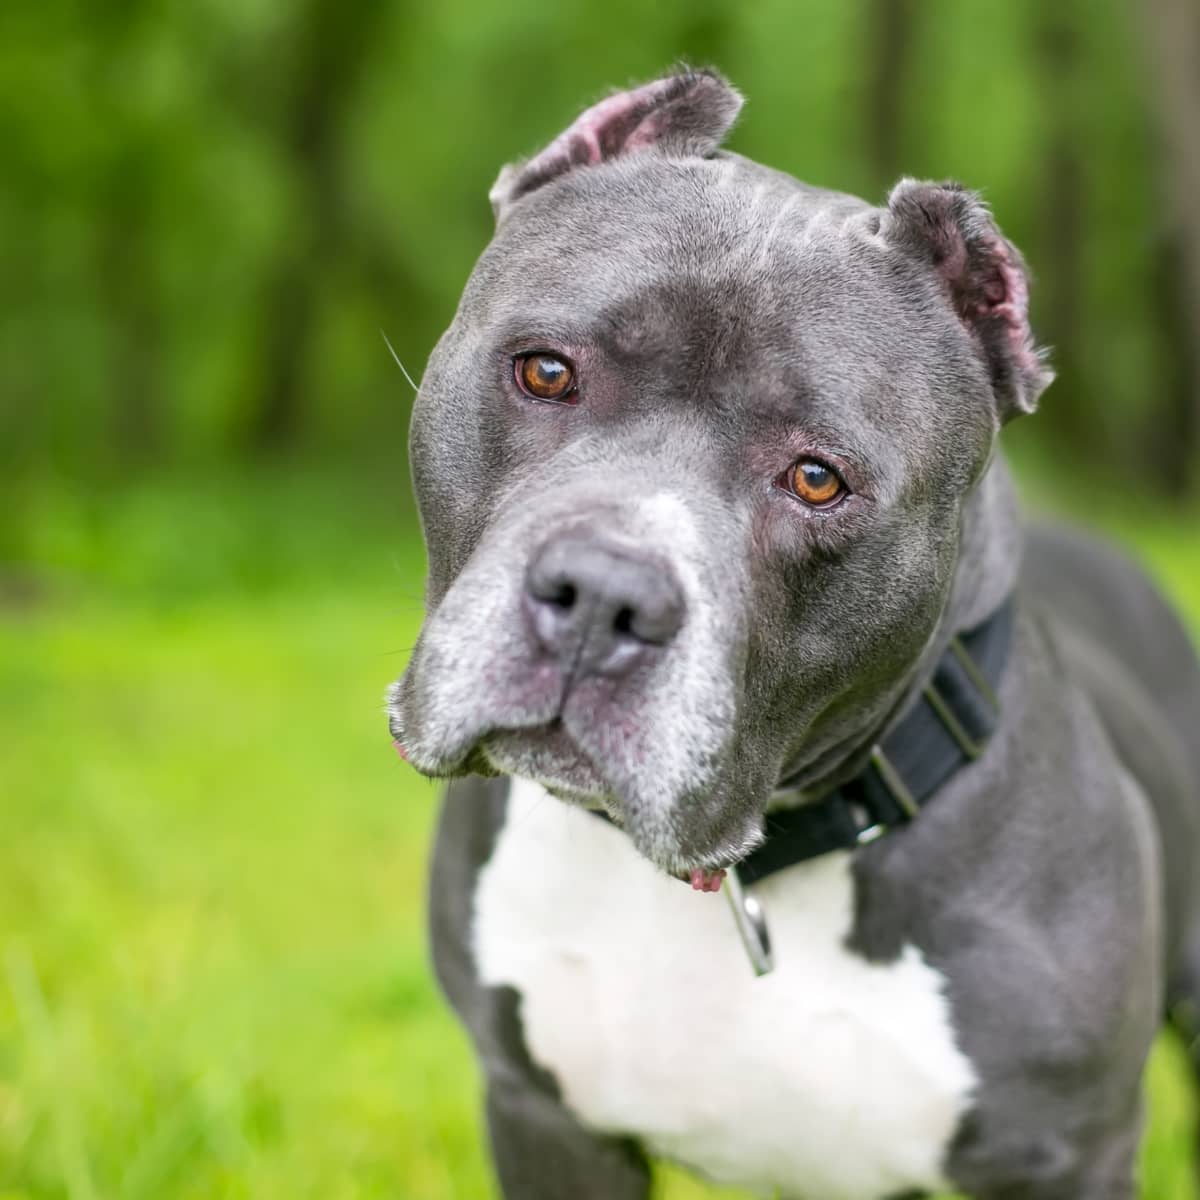 American Bully Dogs Banned in the U.K.—Could the U.S. Follow?